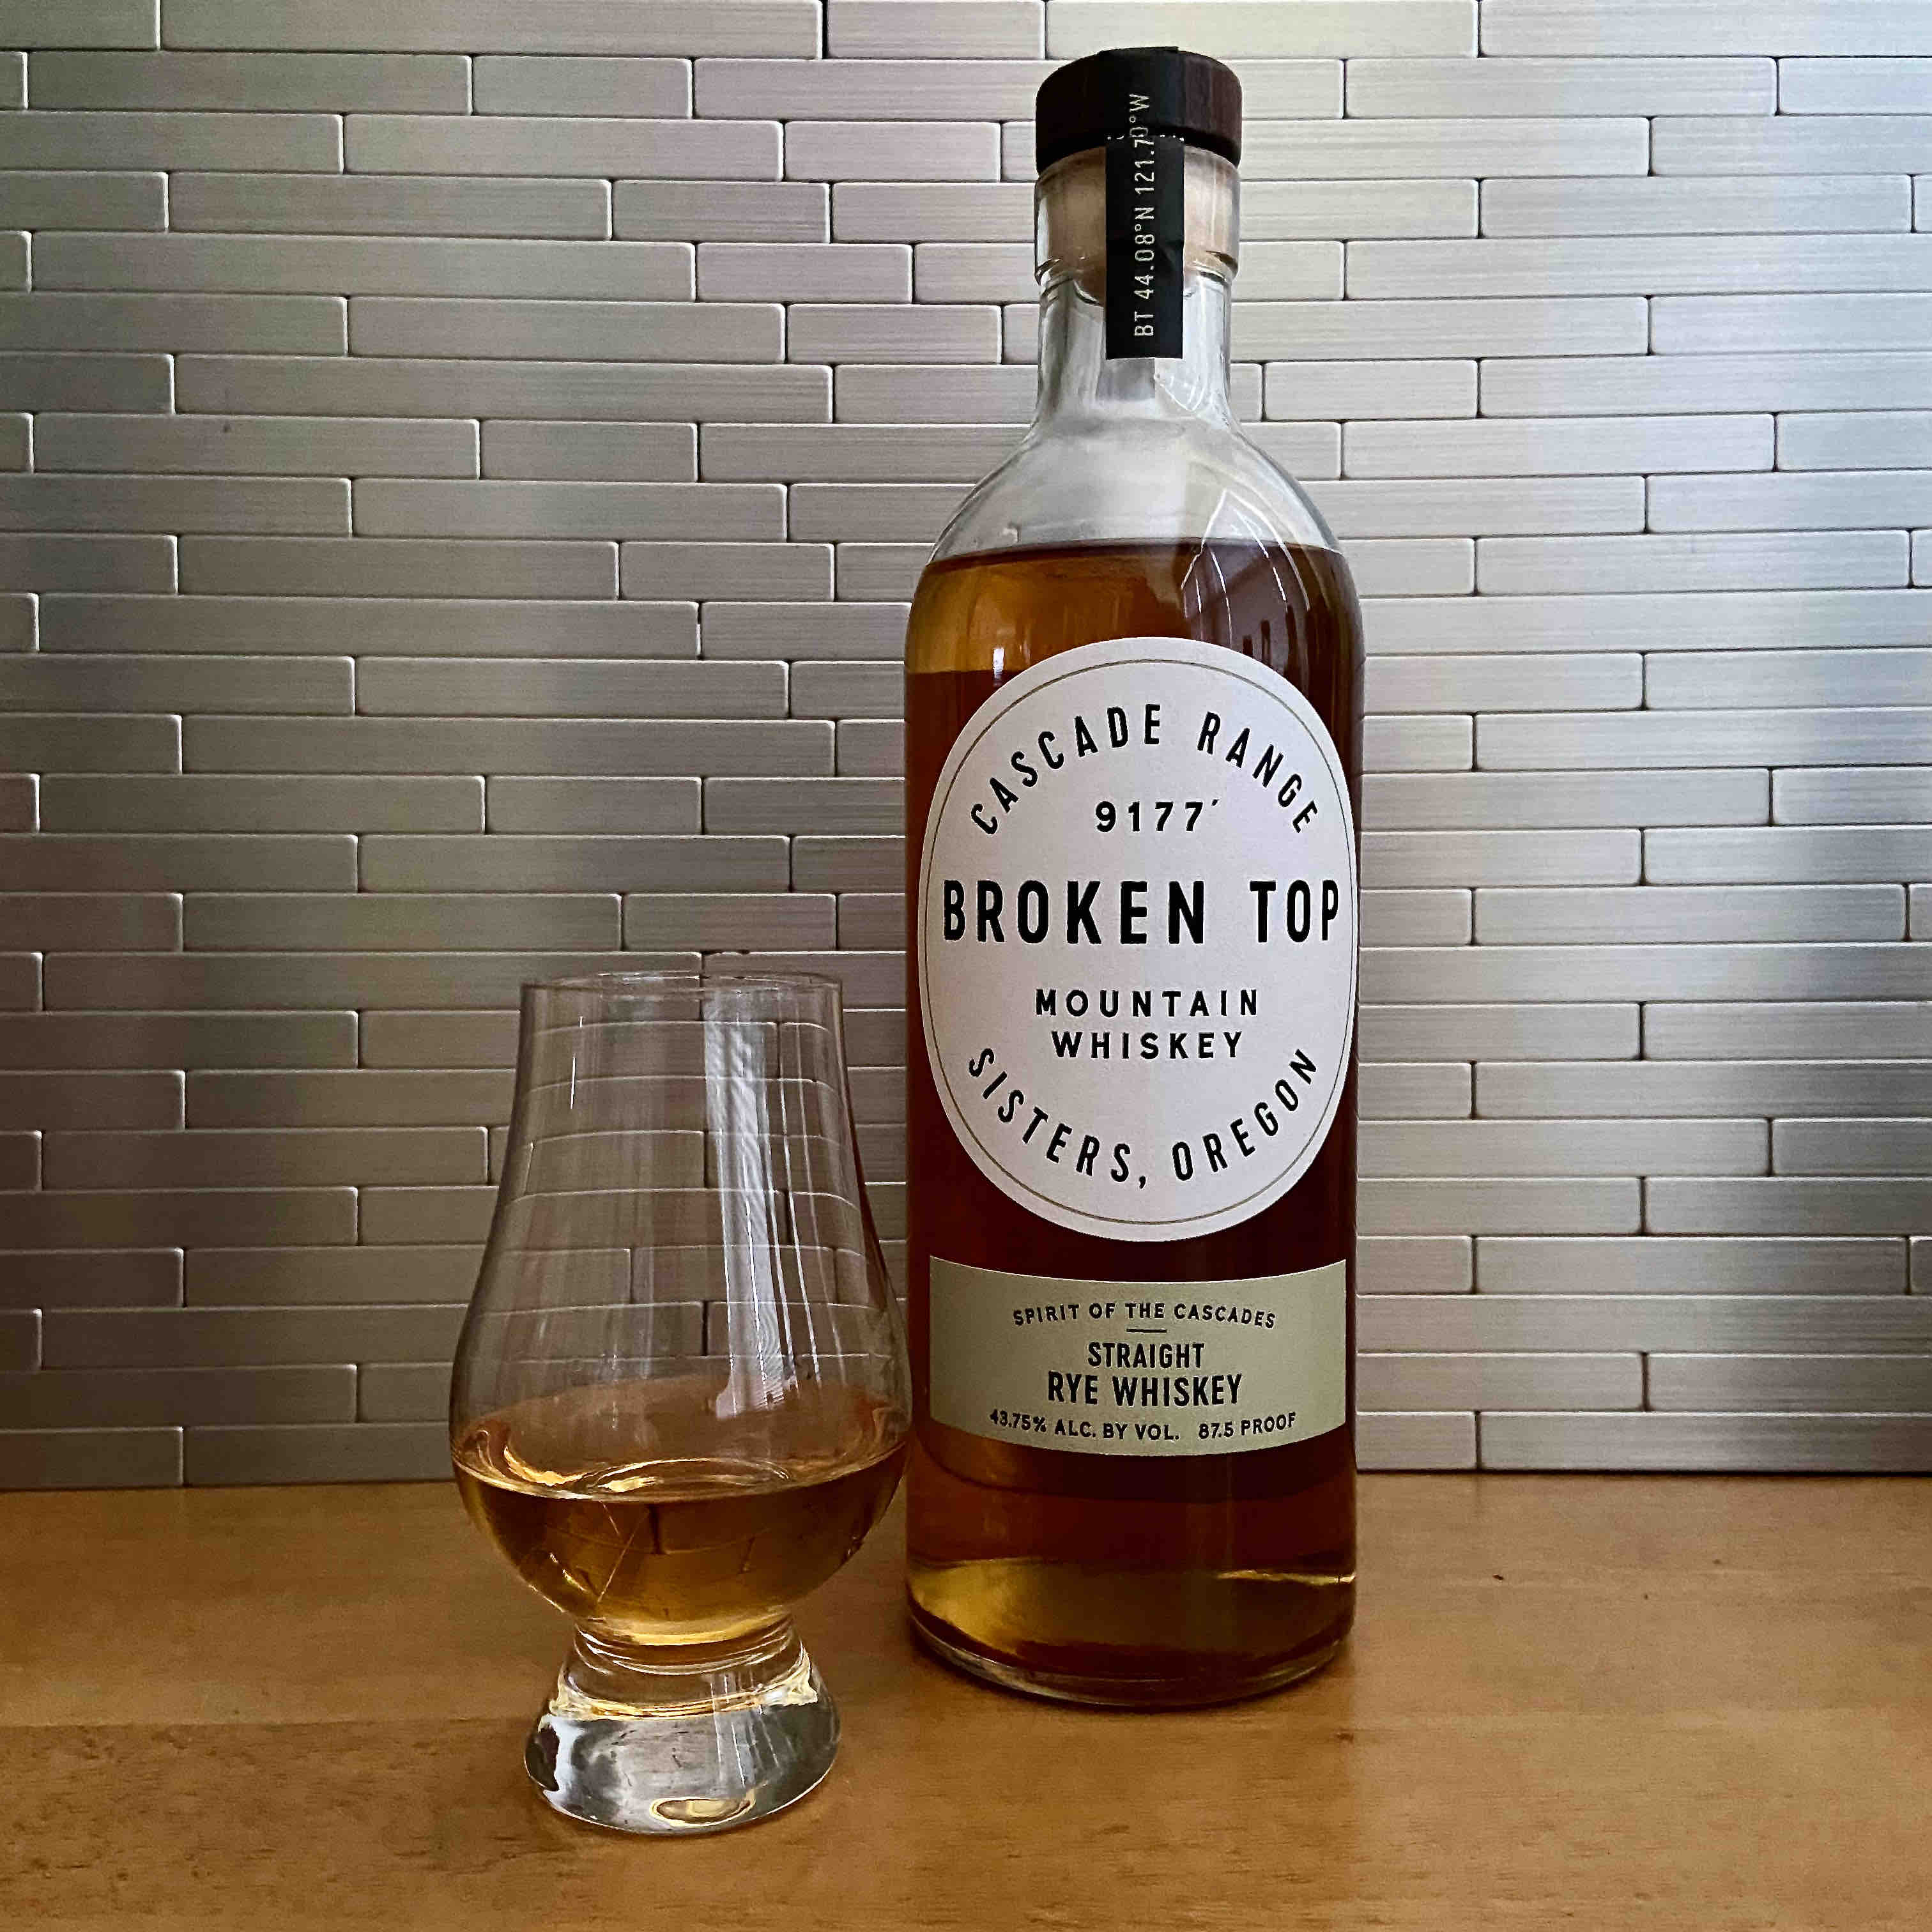 A Glencairn glass of Broken Top Straight Rye Whiskey from Sisters, Oregon.